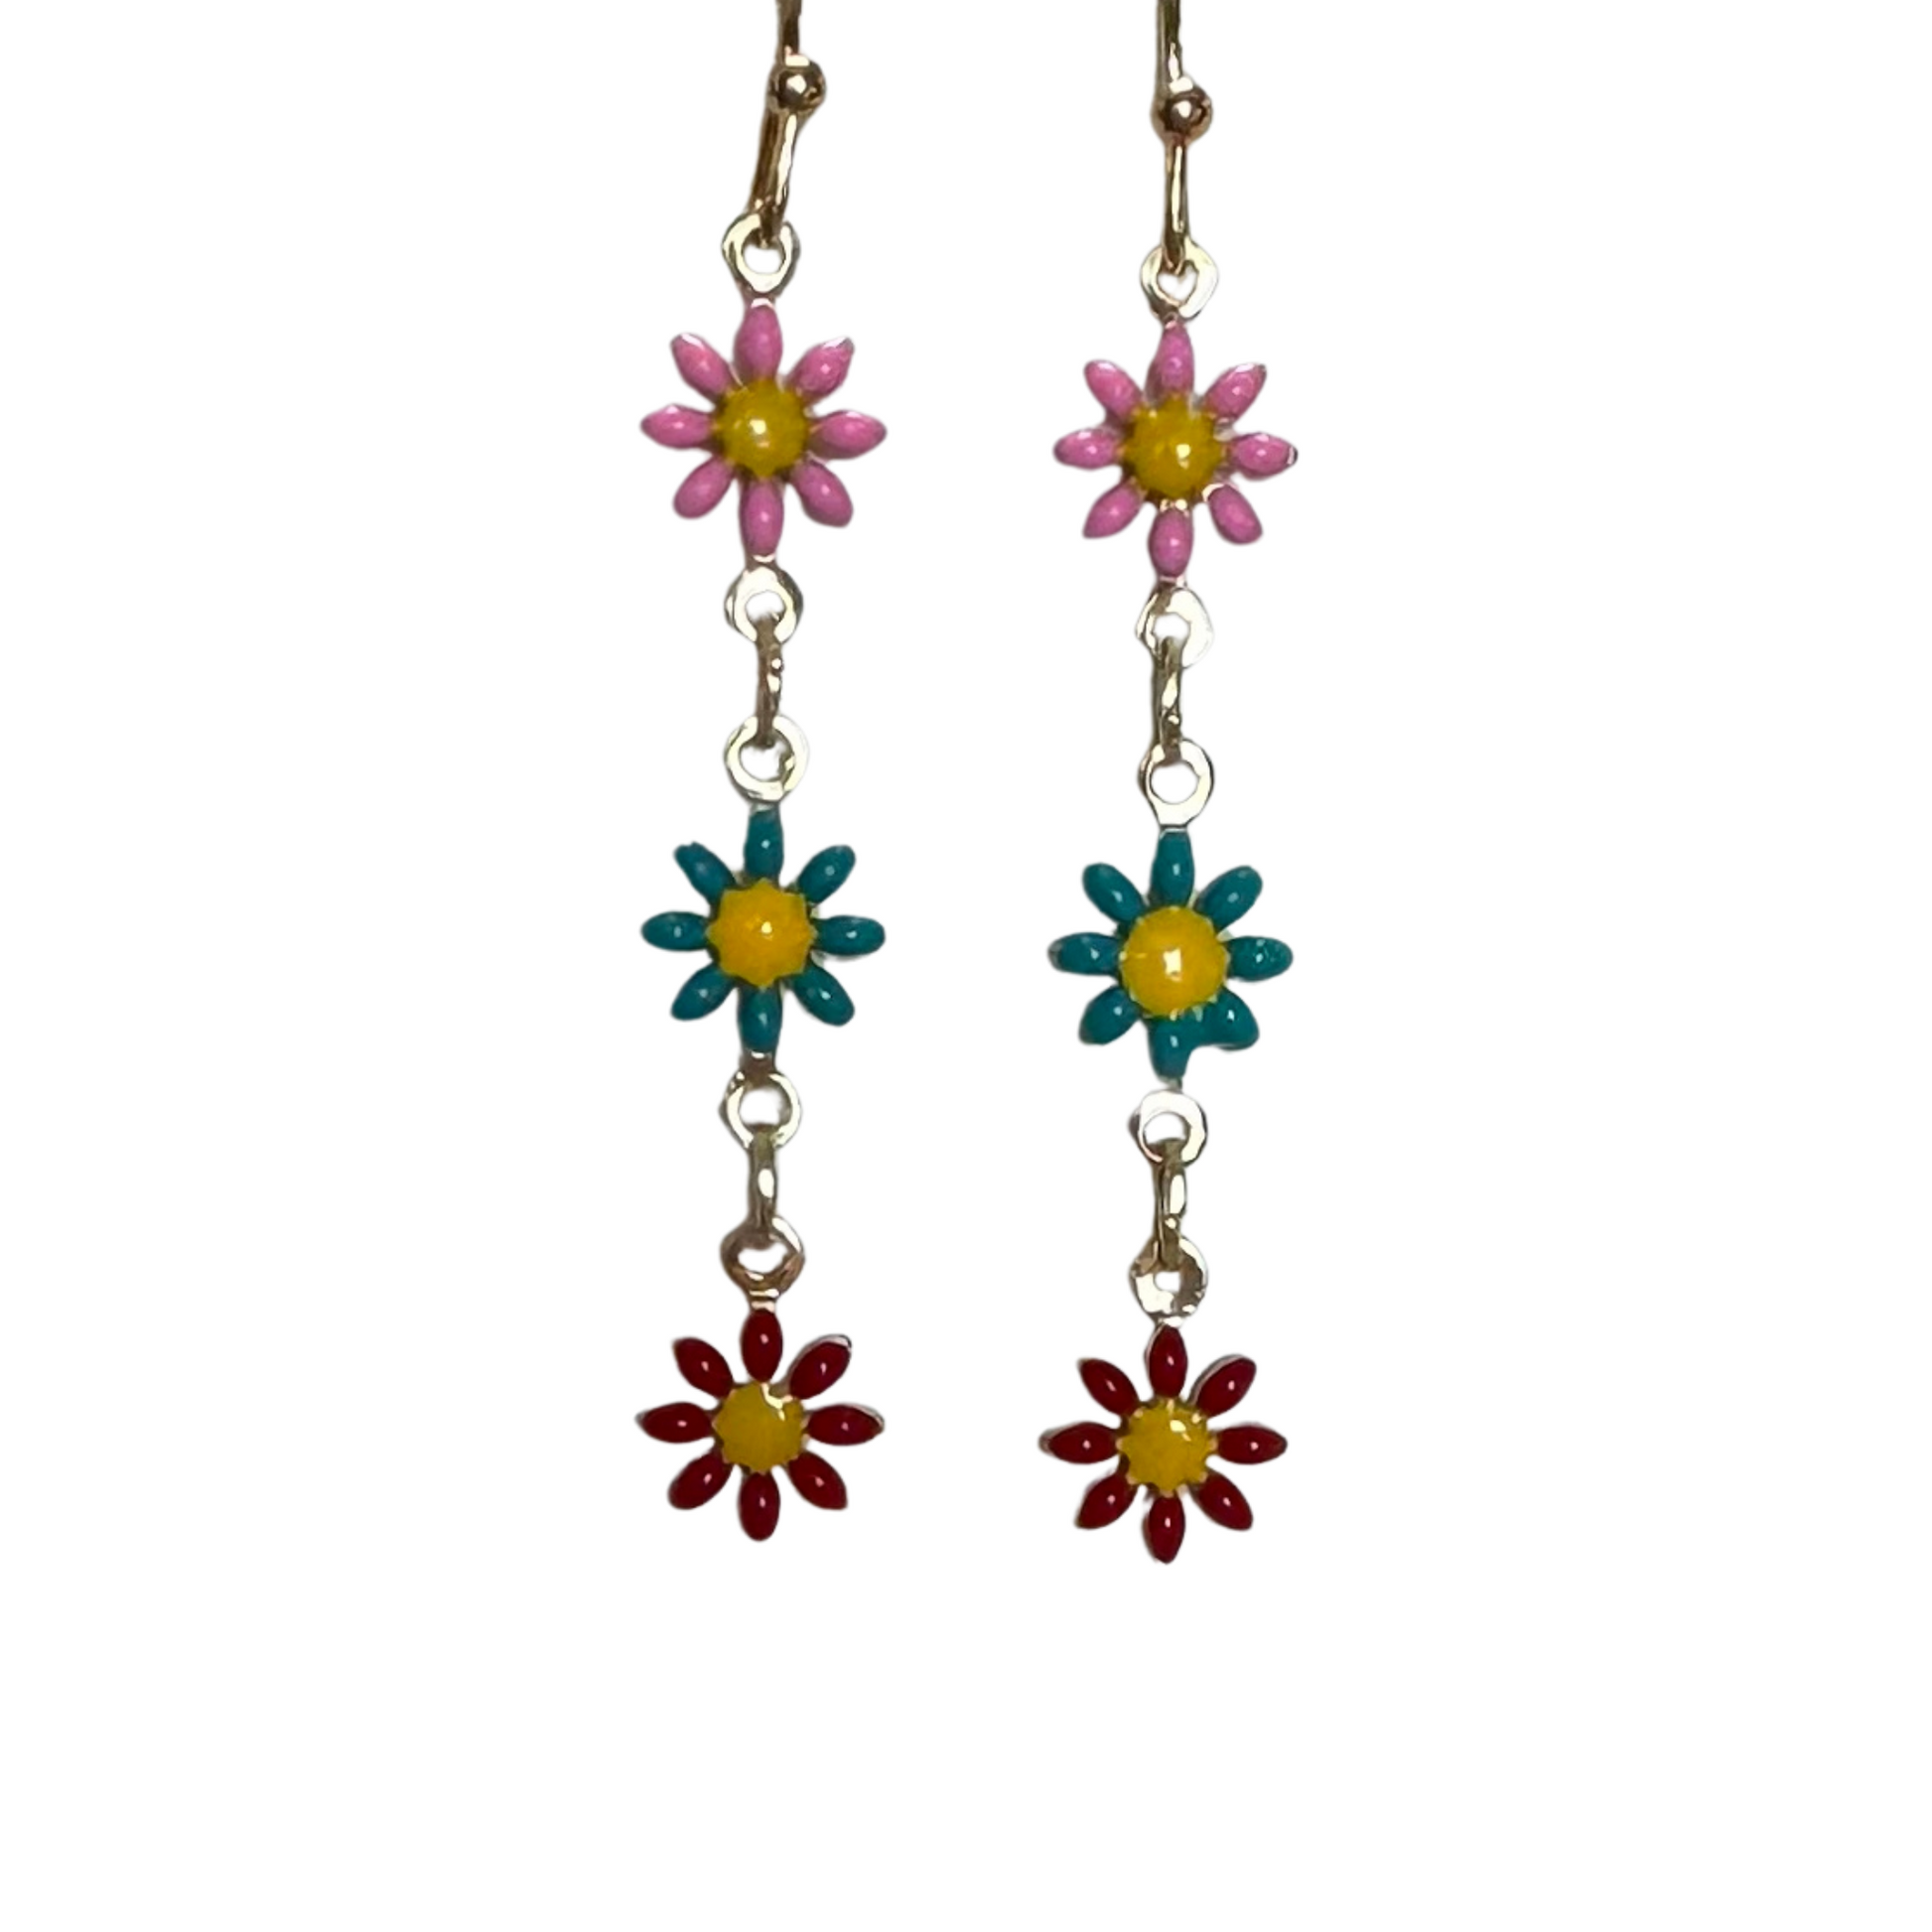 These elegant Triple Flower Dangle Earrings feature delicate, gold plated dangles adorned with colorful flowers. Add a touch of sophistication to any outfit with these dainty earrings. Perfect for any occasion, these earrings are a must-have in your jewelry collection.